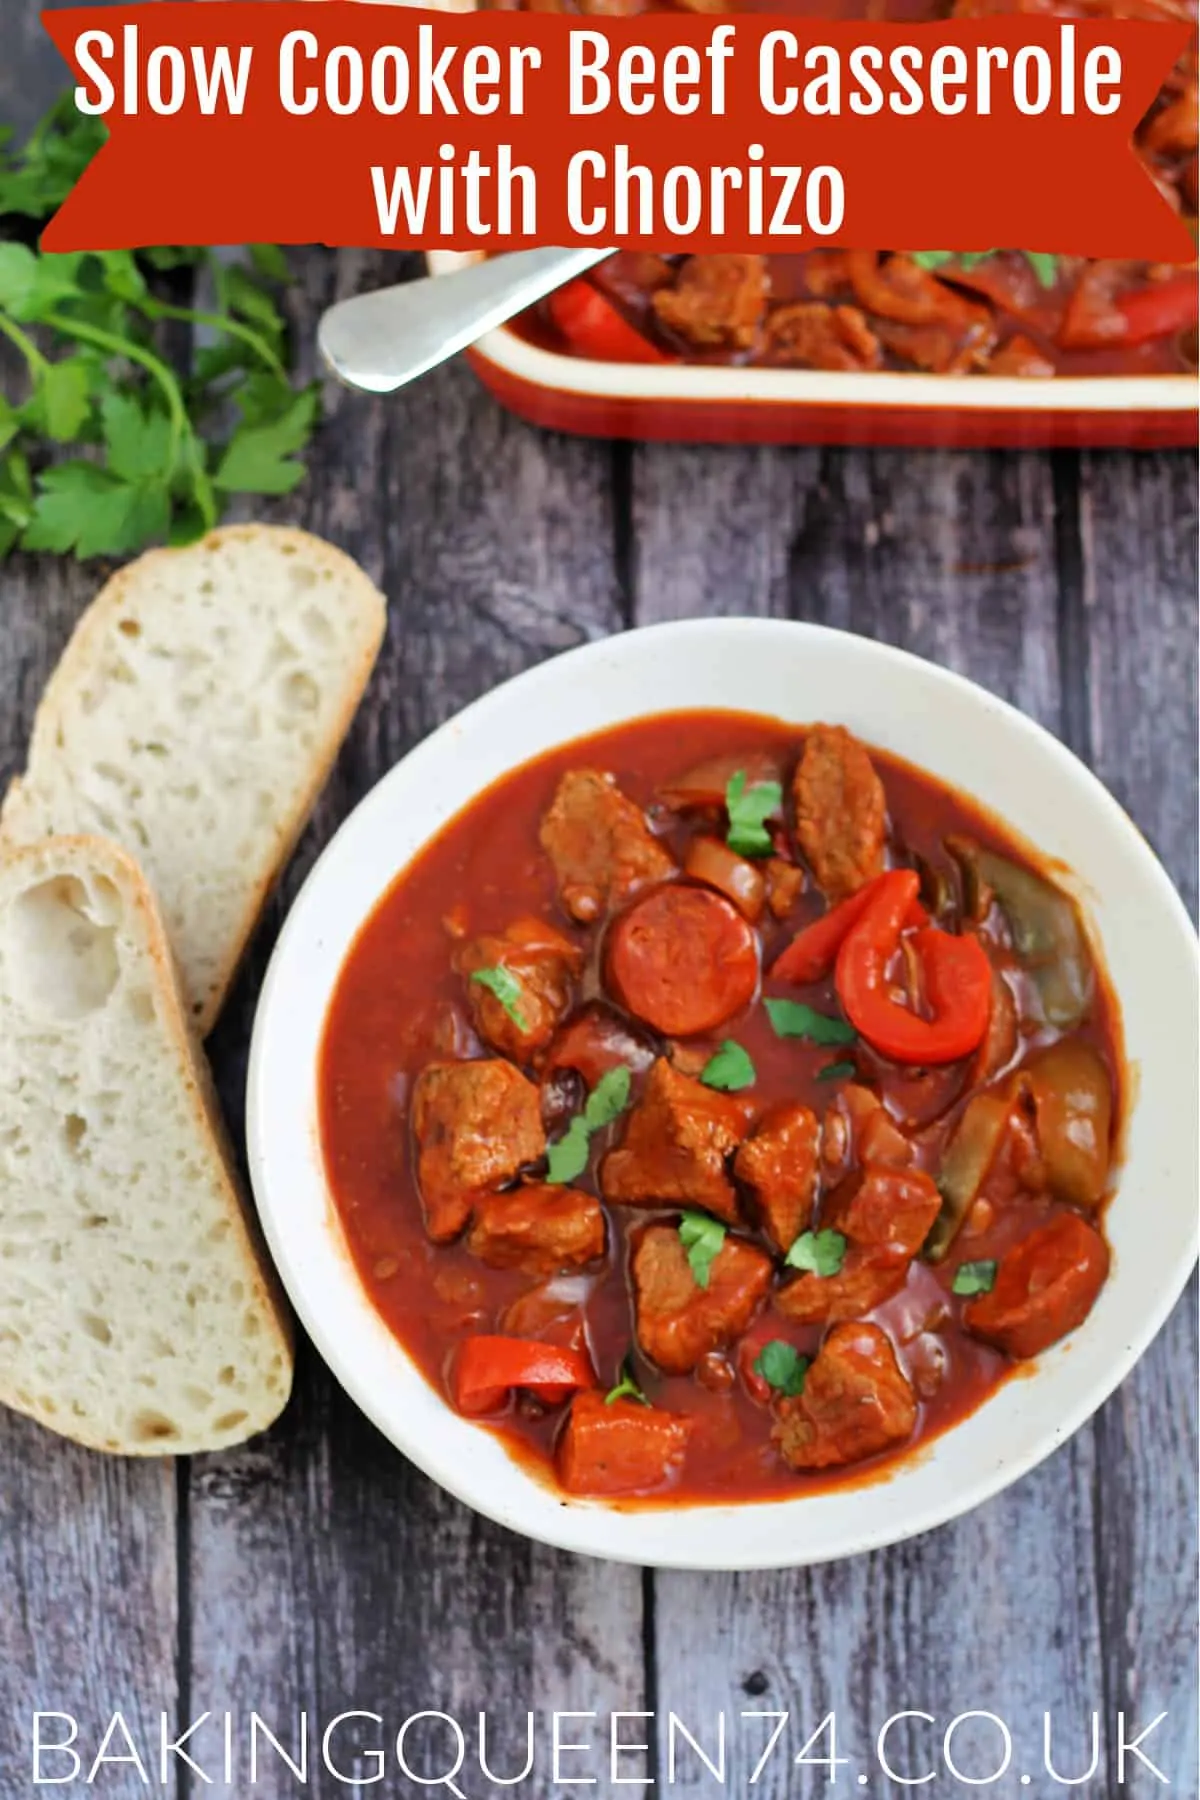 Bowl of beef casserole served with crusty bread on the side, with herbs and serving dish behind, with text overlay (slow cooker beef casserole with chorizo).